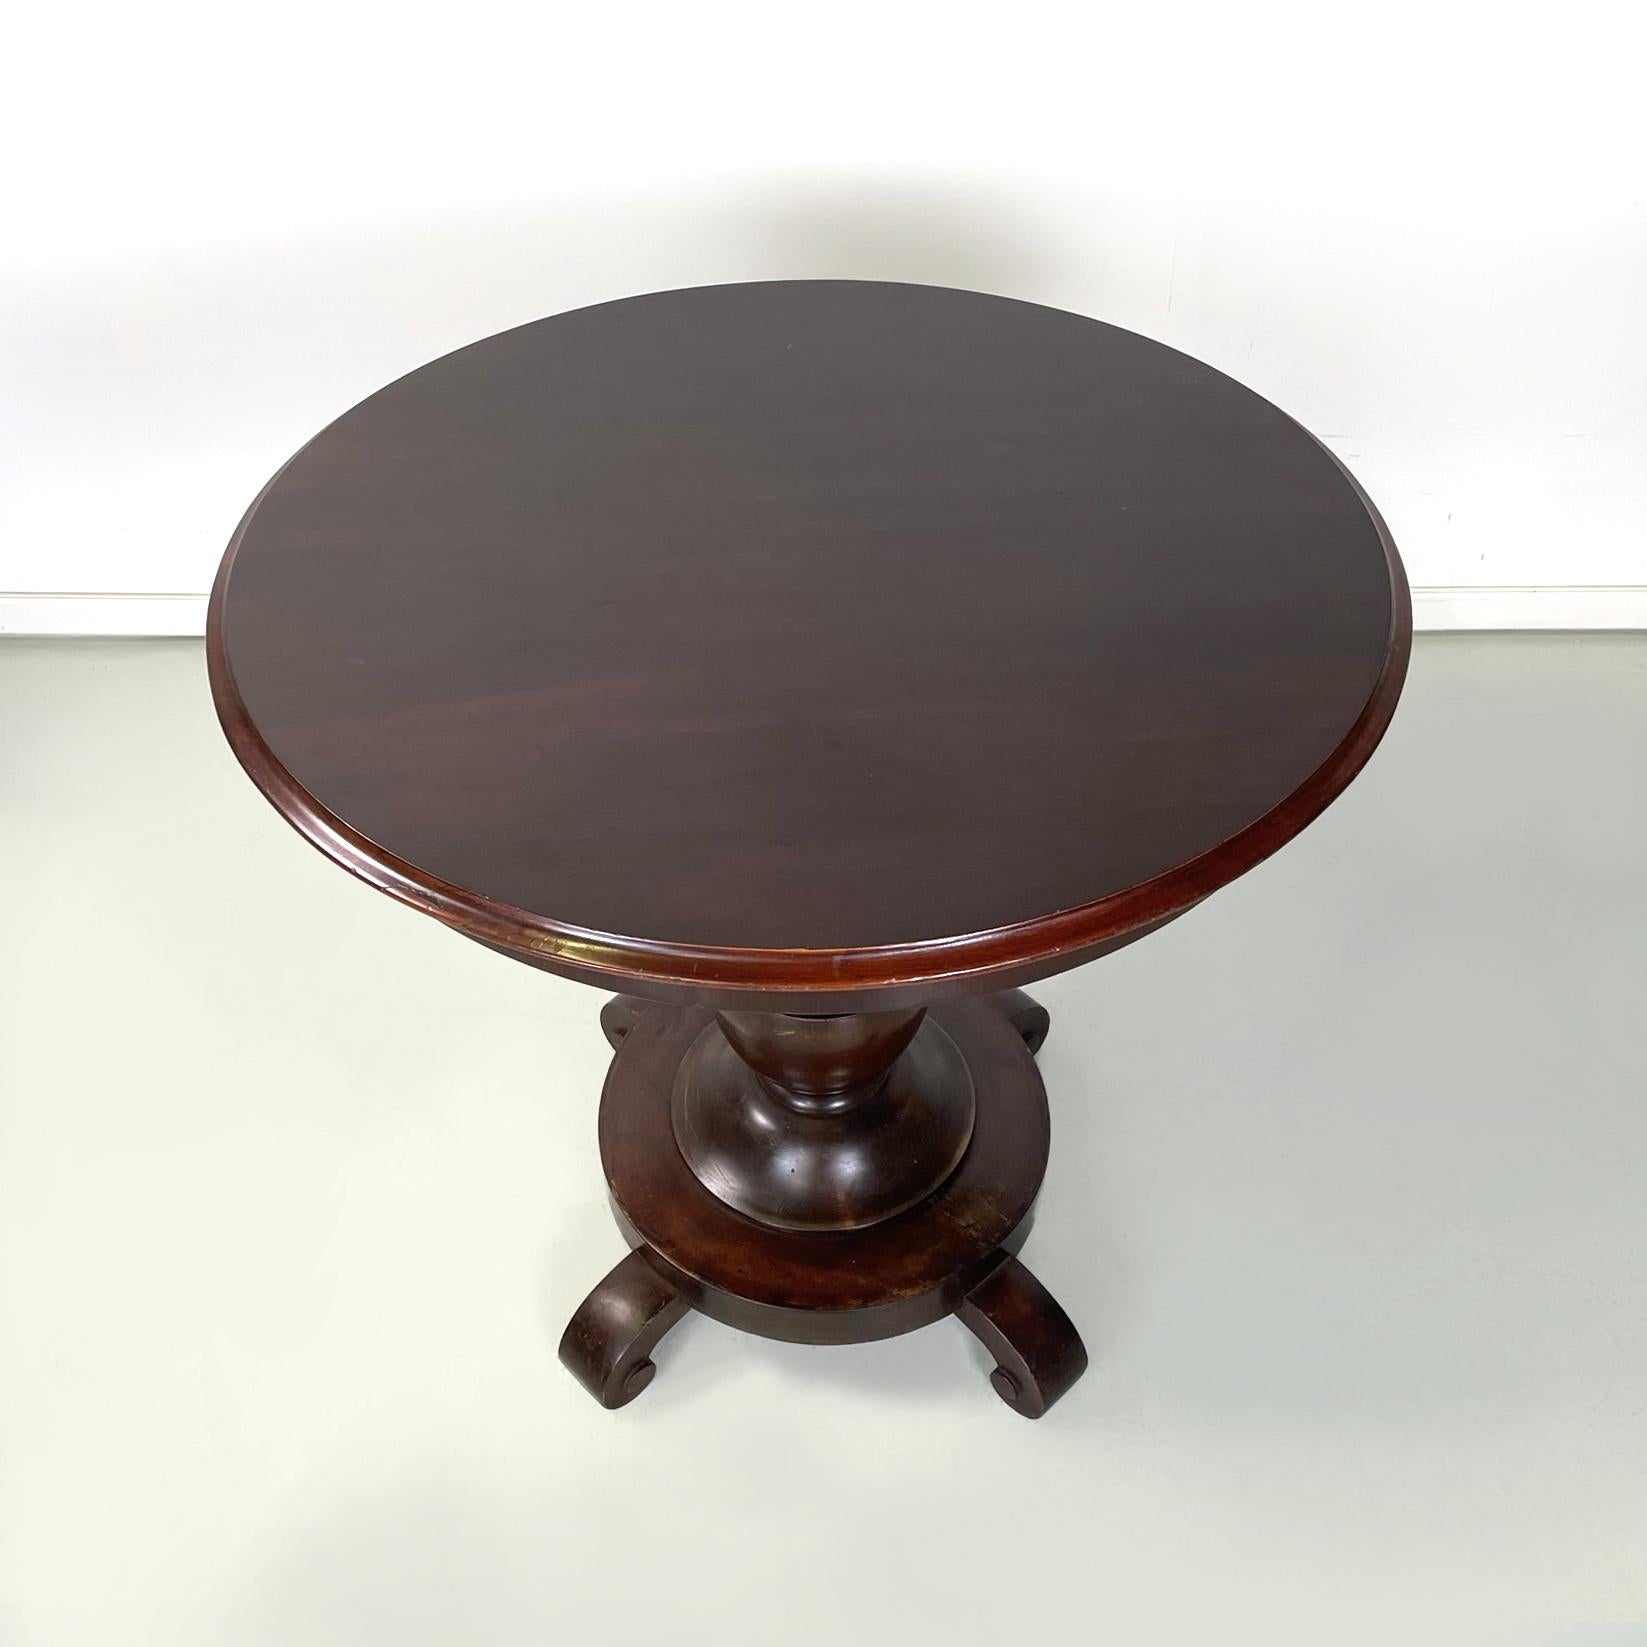 George IV Italian antique walnut round and finely worked wood dining table, 1800s         For Sale